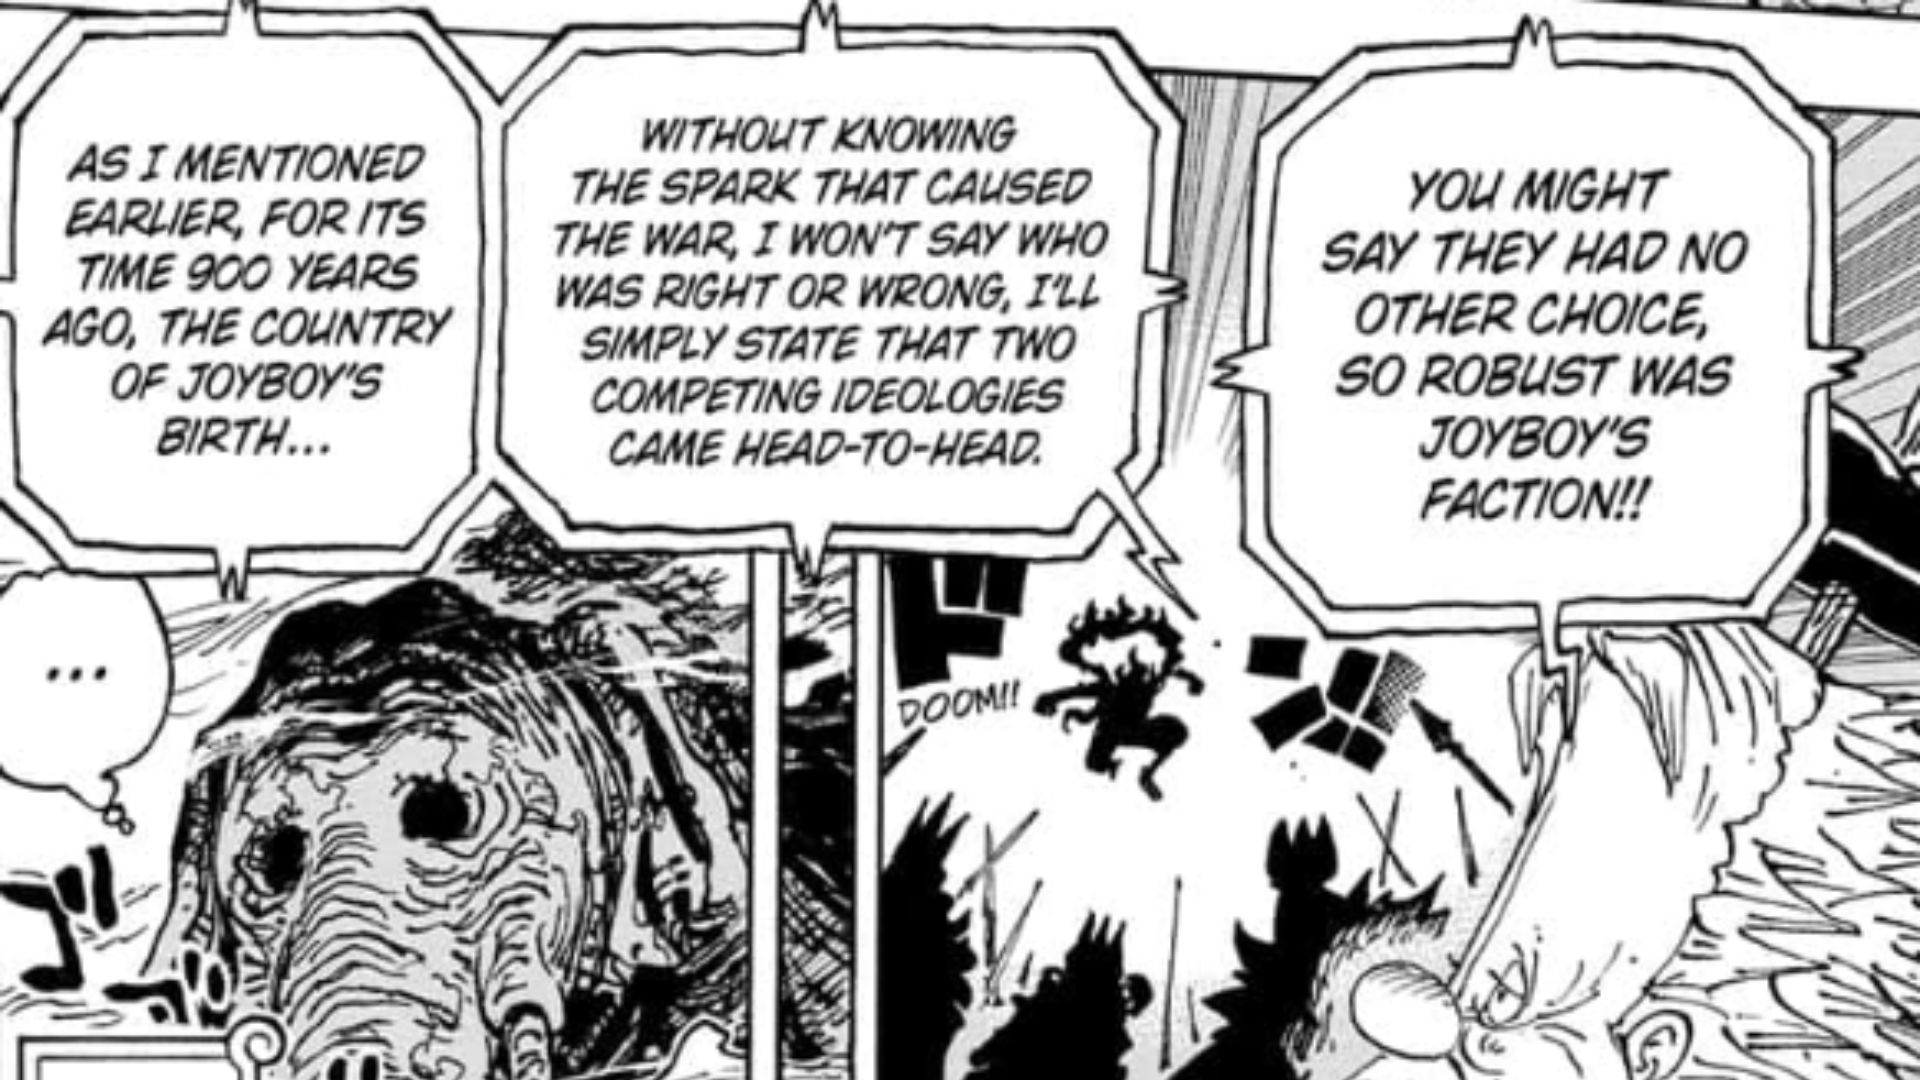 A panel from One Piece Chapter #1115 featuring Vegapunk talking about the cause of the war